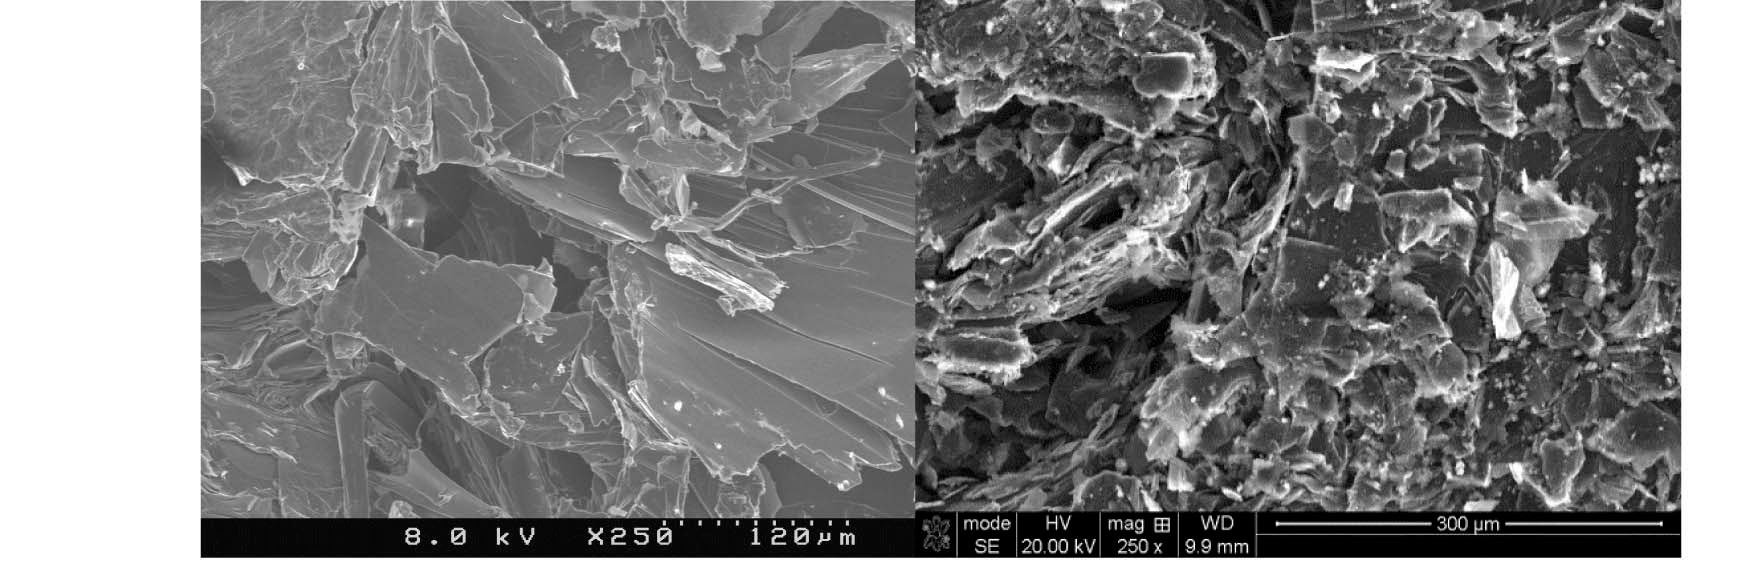 SEM Image of Unirradiated (Left) and Irradiated (Right) POCOFoam® at 250x